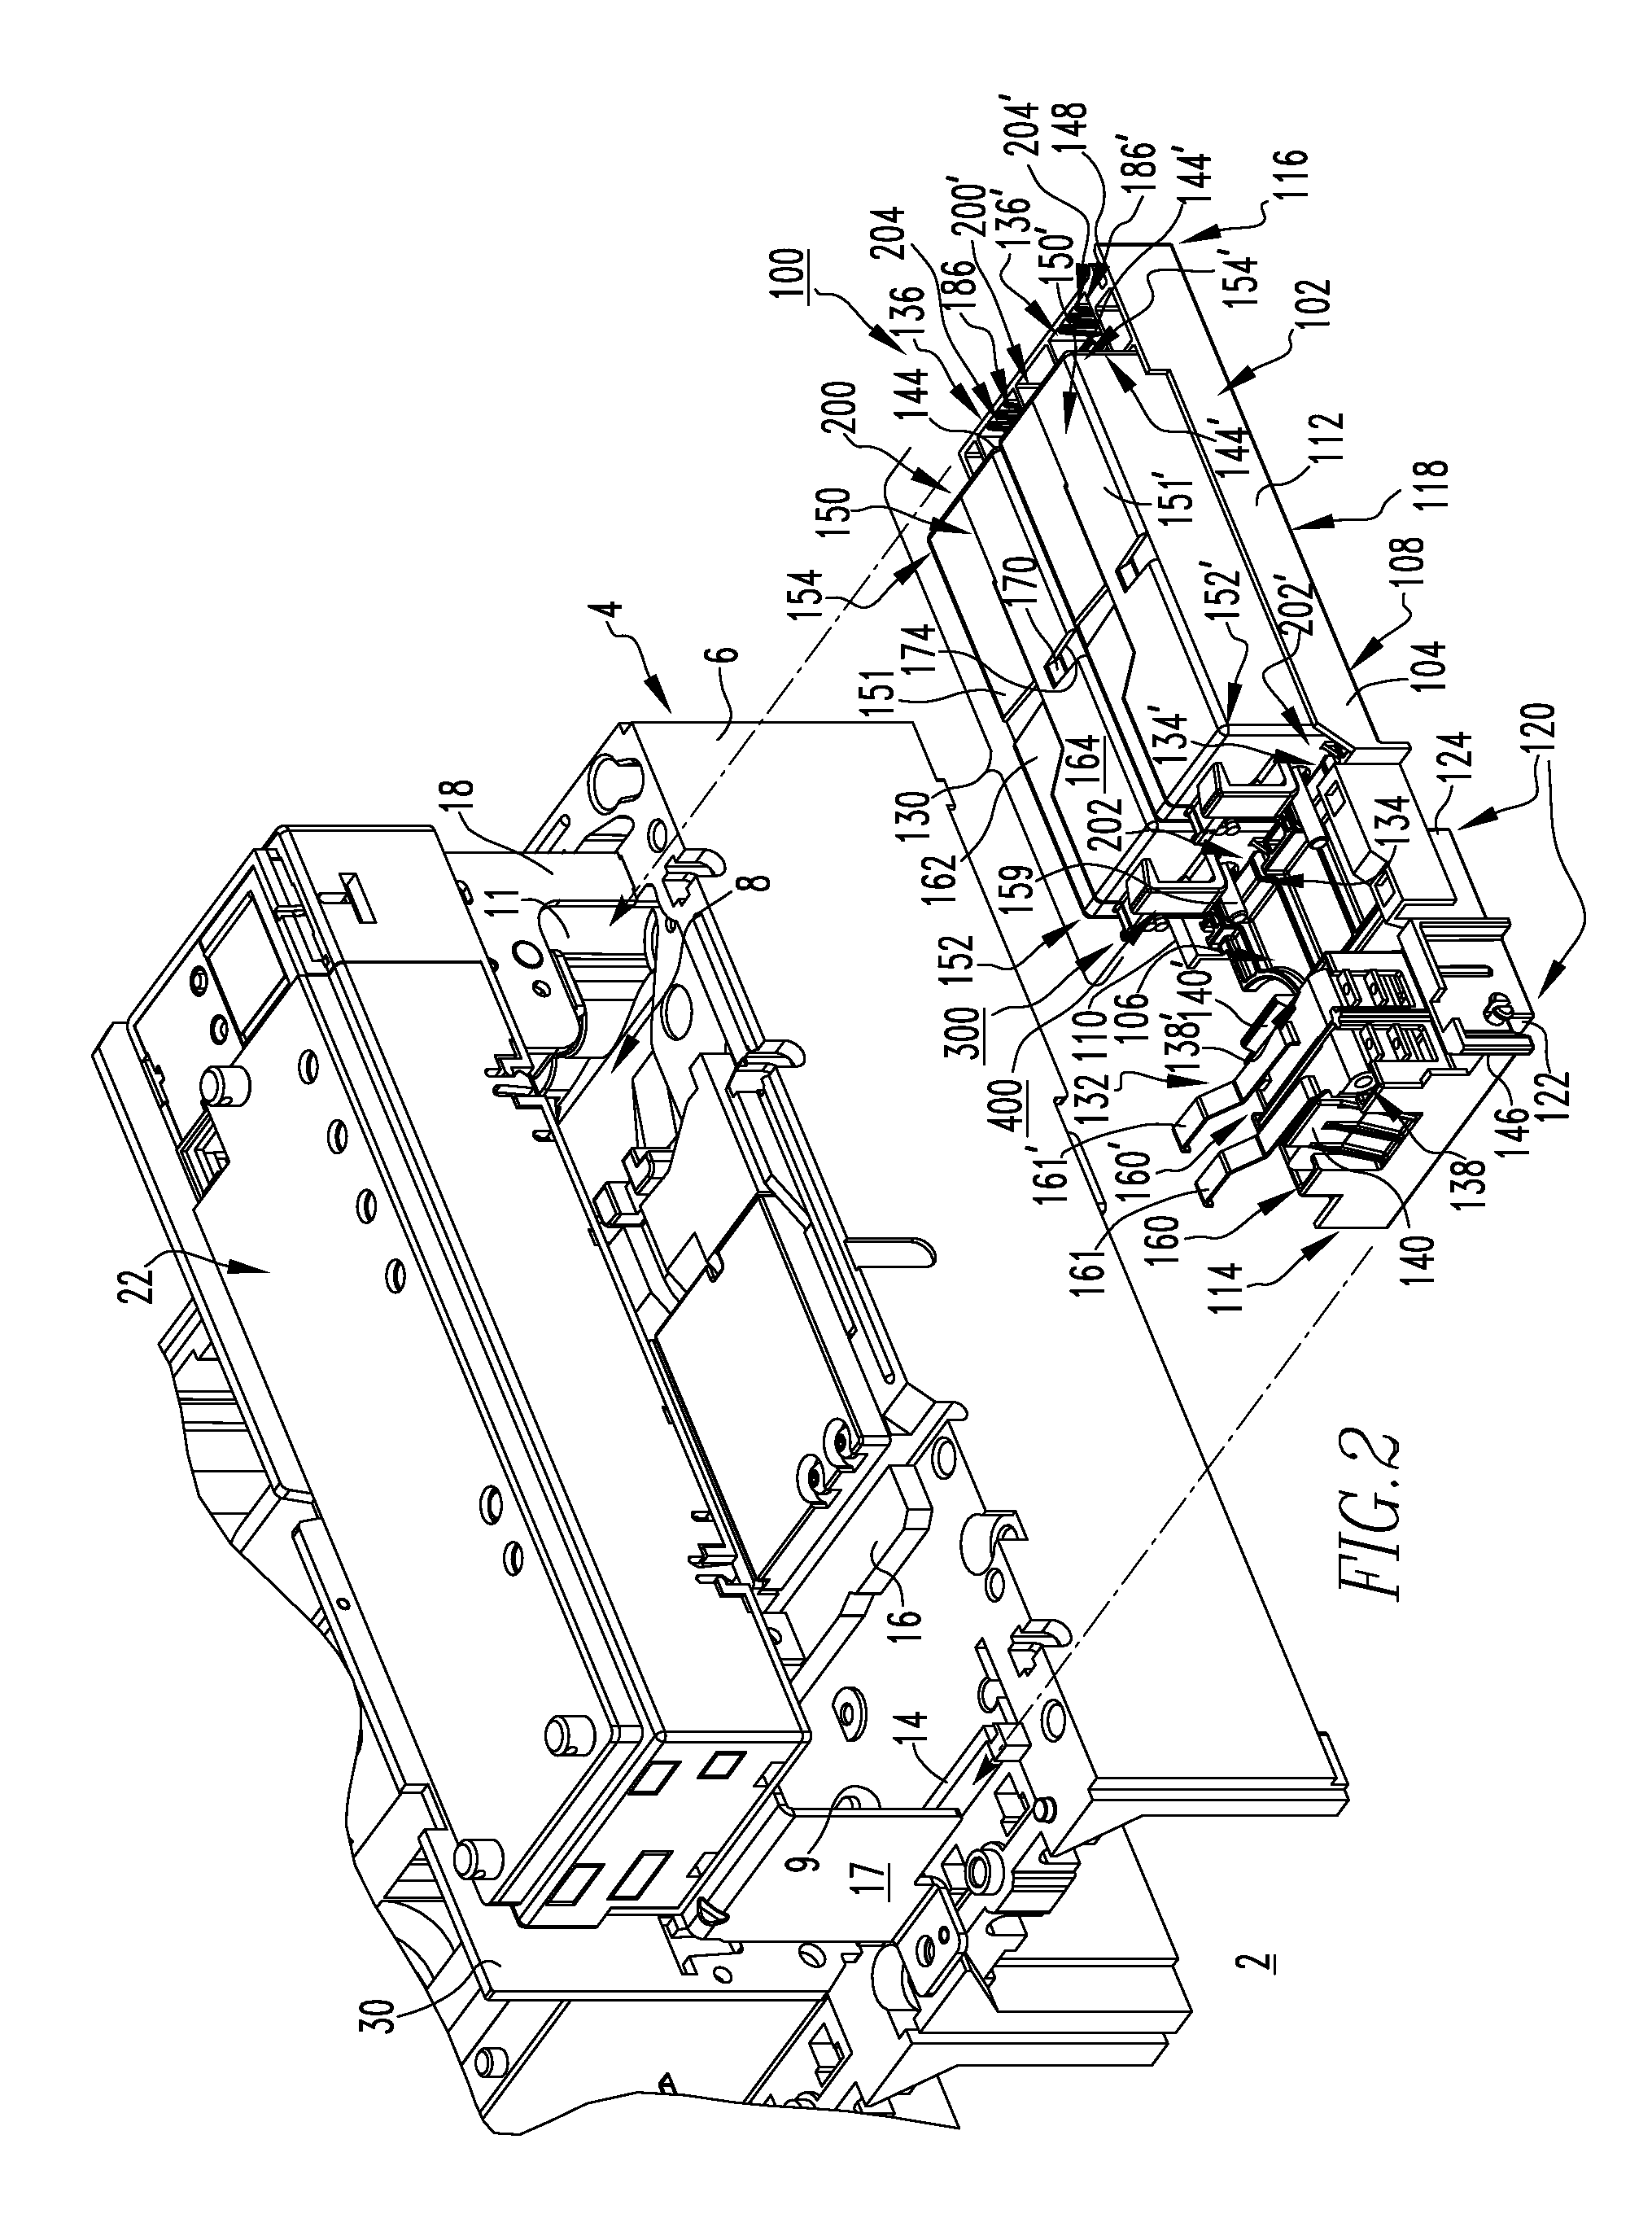 Electrical switching apparatus and trip bar therefor